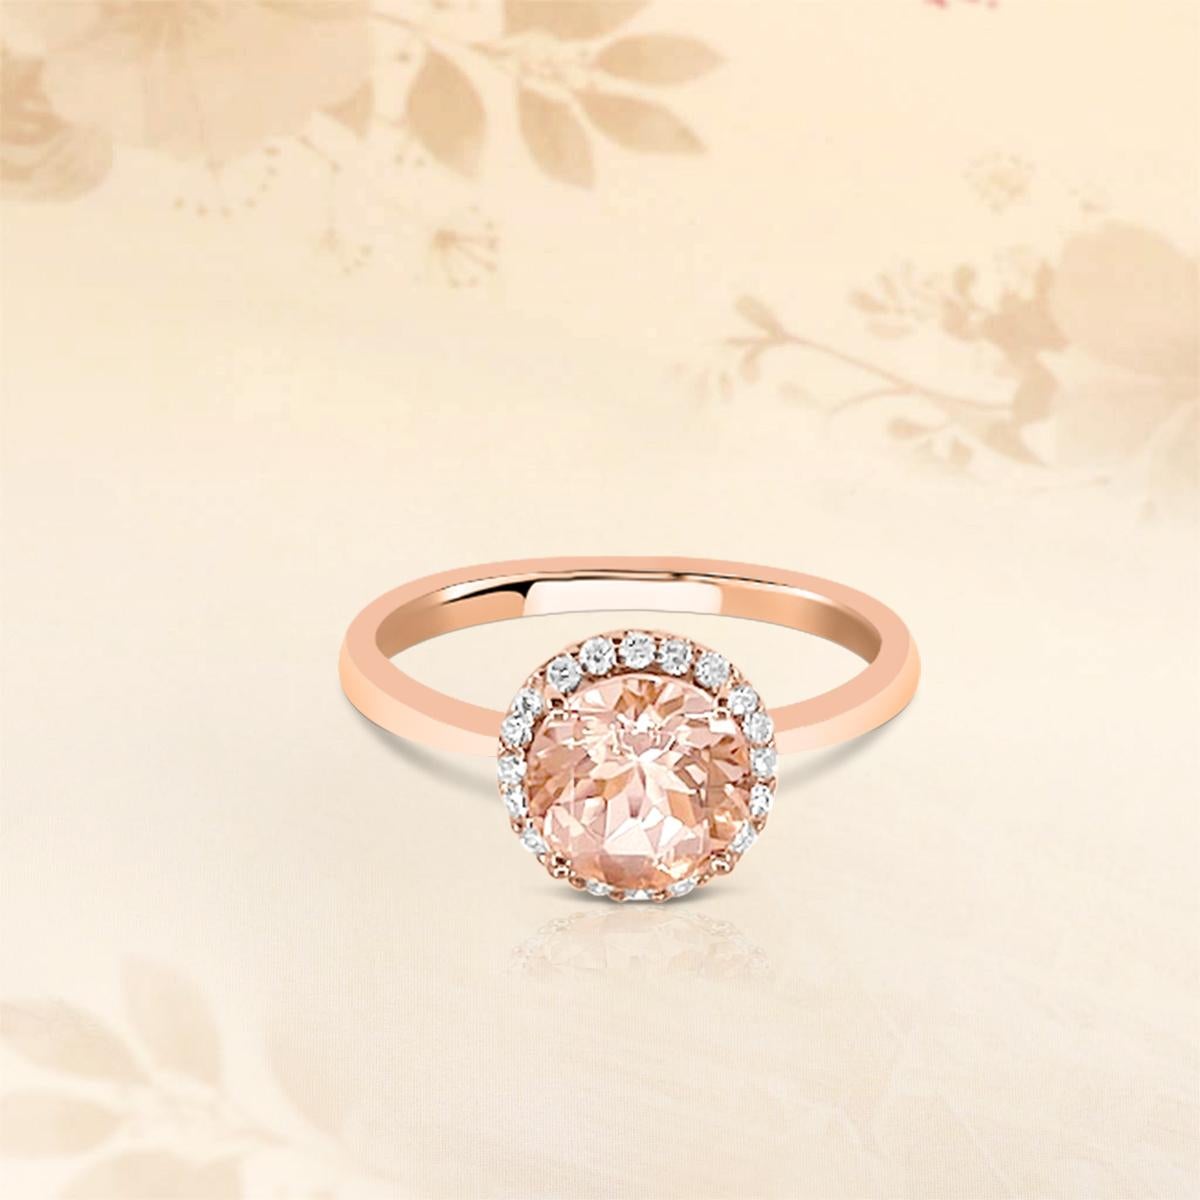 Exquisite In Every Sense, This Gorgeous Ring Features 6mm Round Morganite Gemstone And Diamonds Set In Striking 14K Rose Gold Complete Its Elegance. This Piece Of Beauty Is Perfectly Designed For Someone Special.
 


Style# TS1079MOR
Morganite: